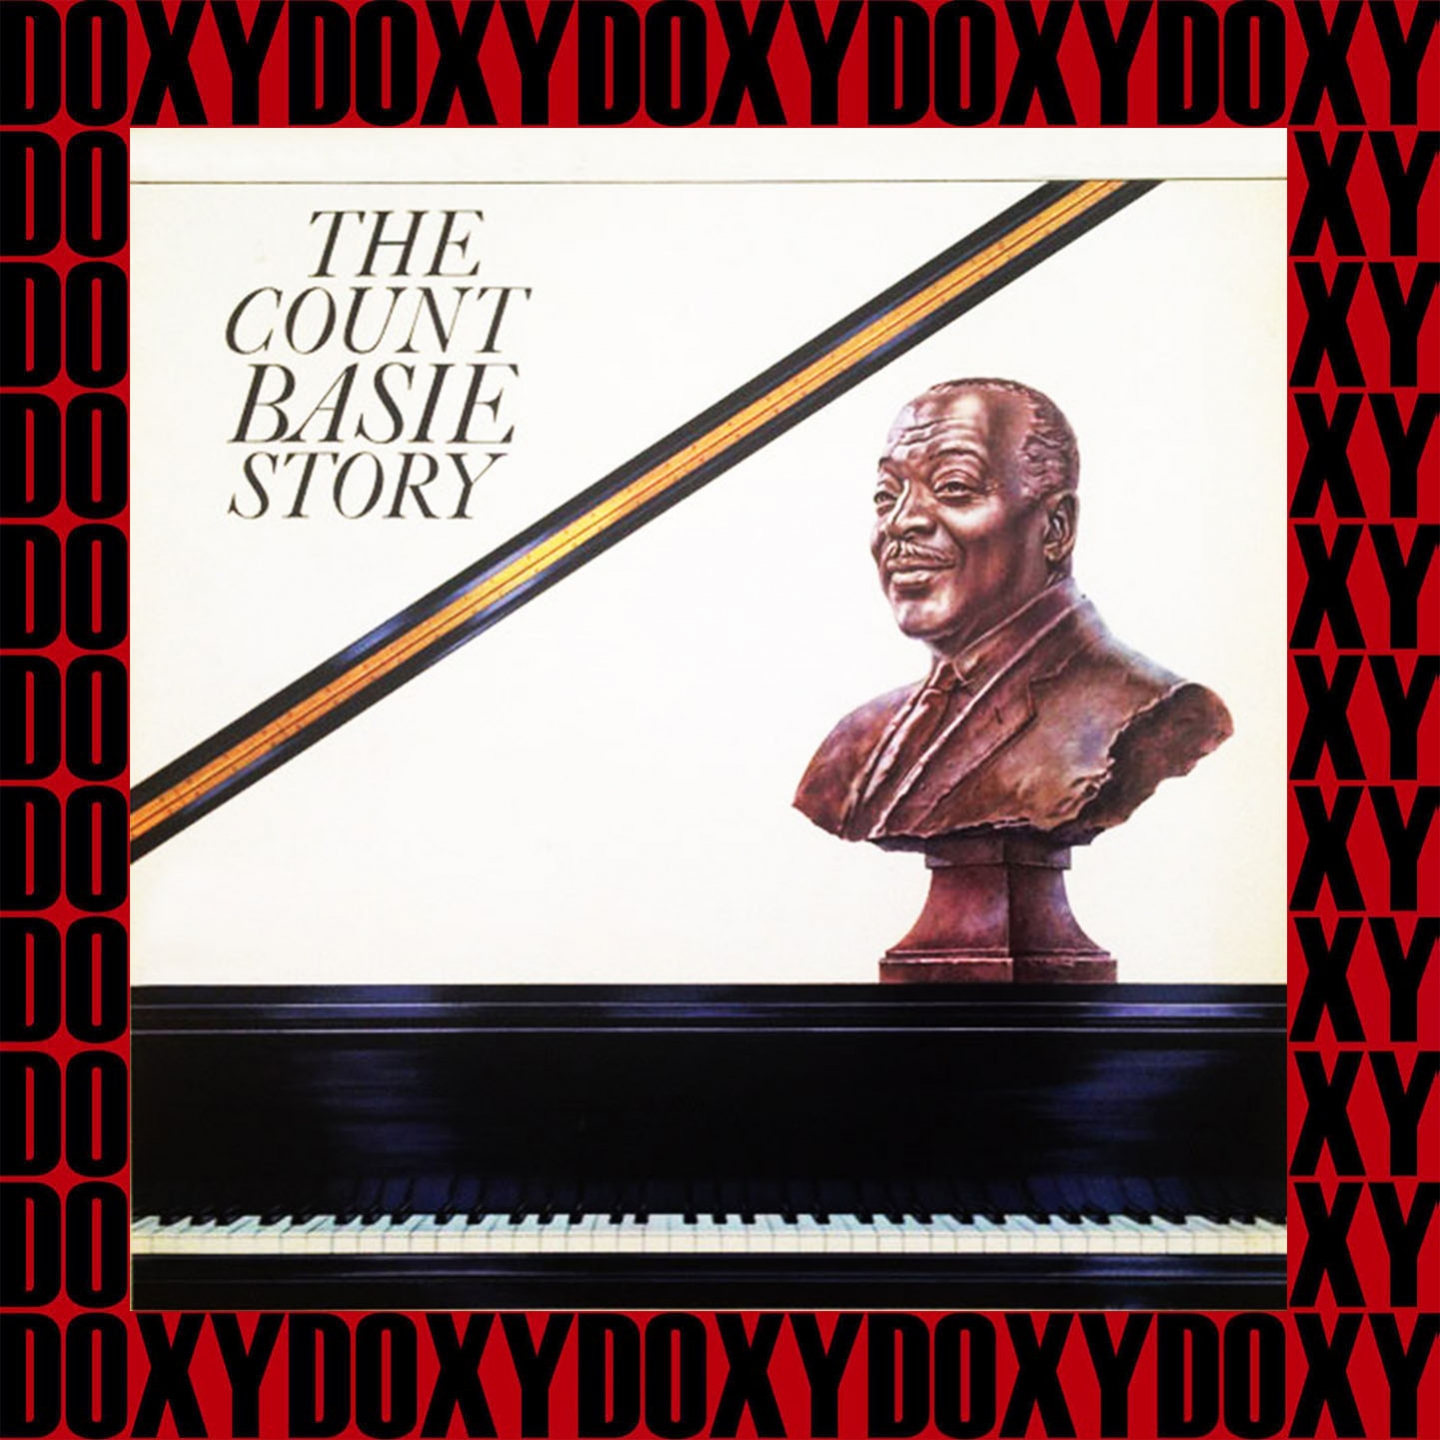 The Count Basie Story (Expanded, Remastered Version) (Doxy Collection)